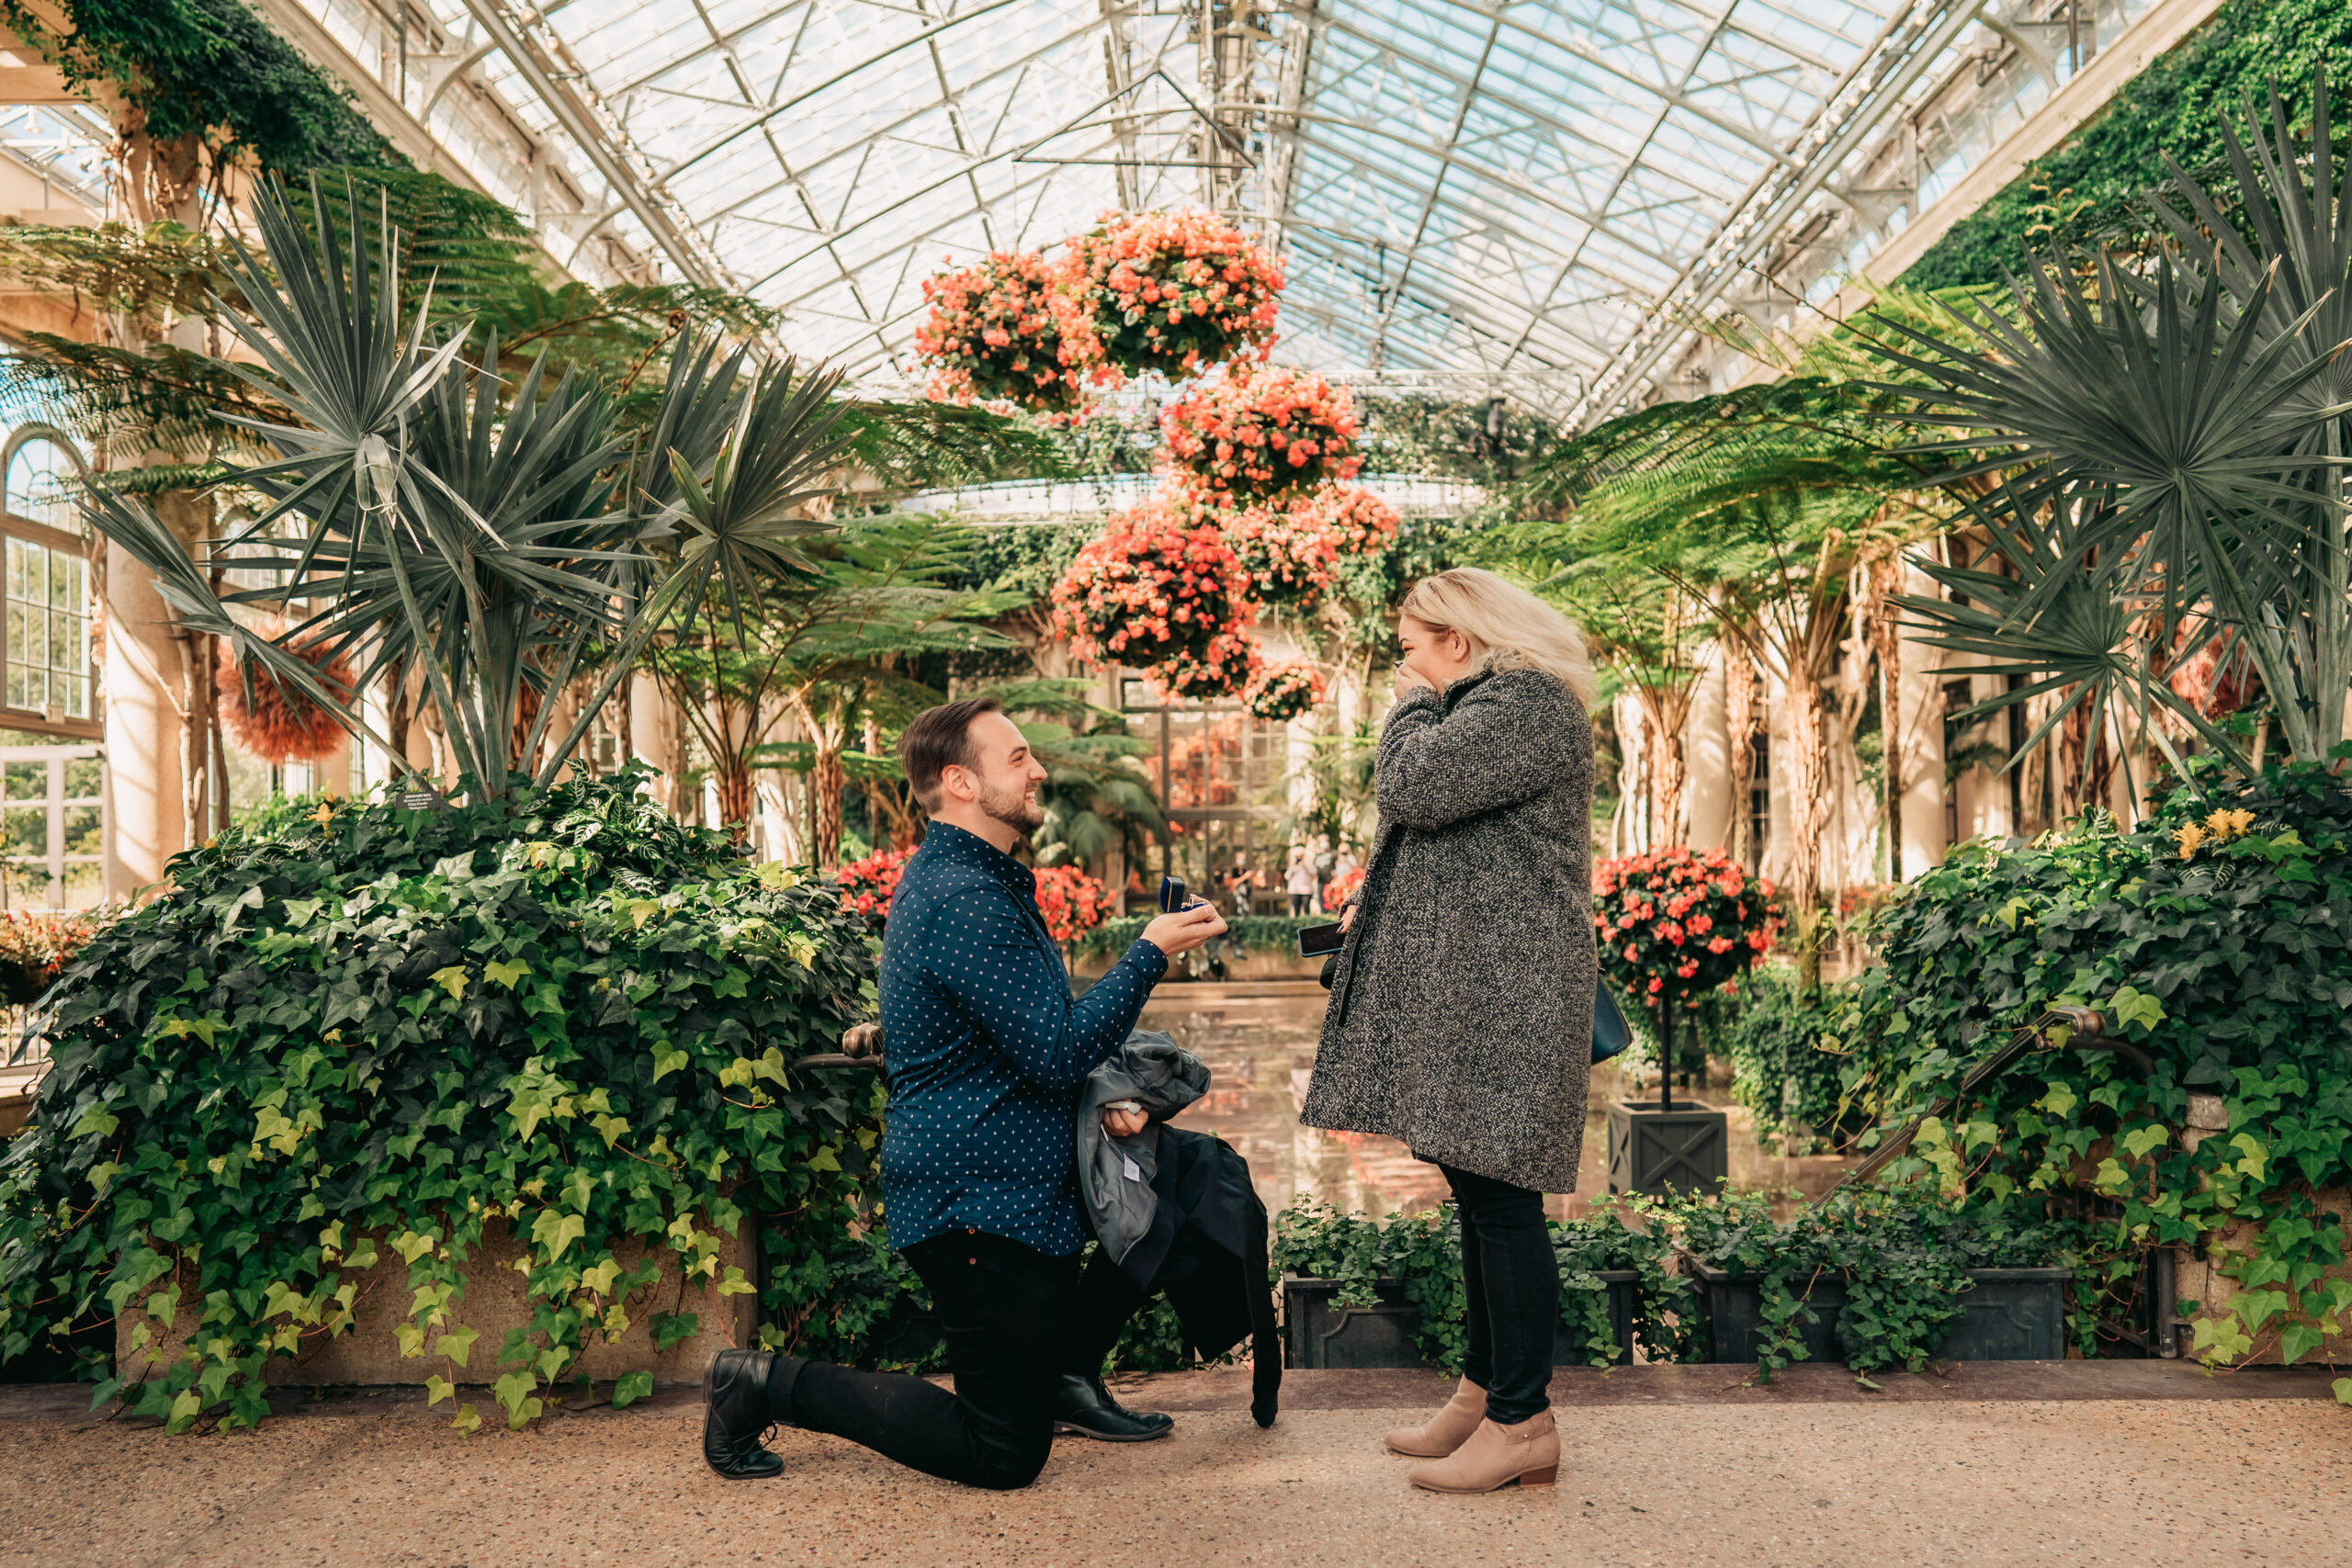 Longwood Gardens Proposal, Longwood Gardens Proposal Photographer, Longwood Gardens Pennsylvania, Engagement Photographer, Proposal Photographer, NJ Proposal Photographer, man kneeling on one knee as he smiles and holds up a ring box while his about to be fiancè covers her mouth in shock 